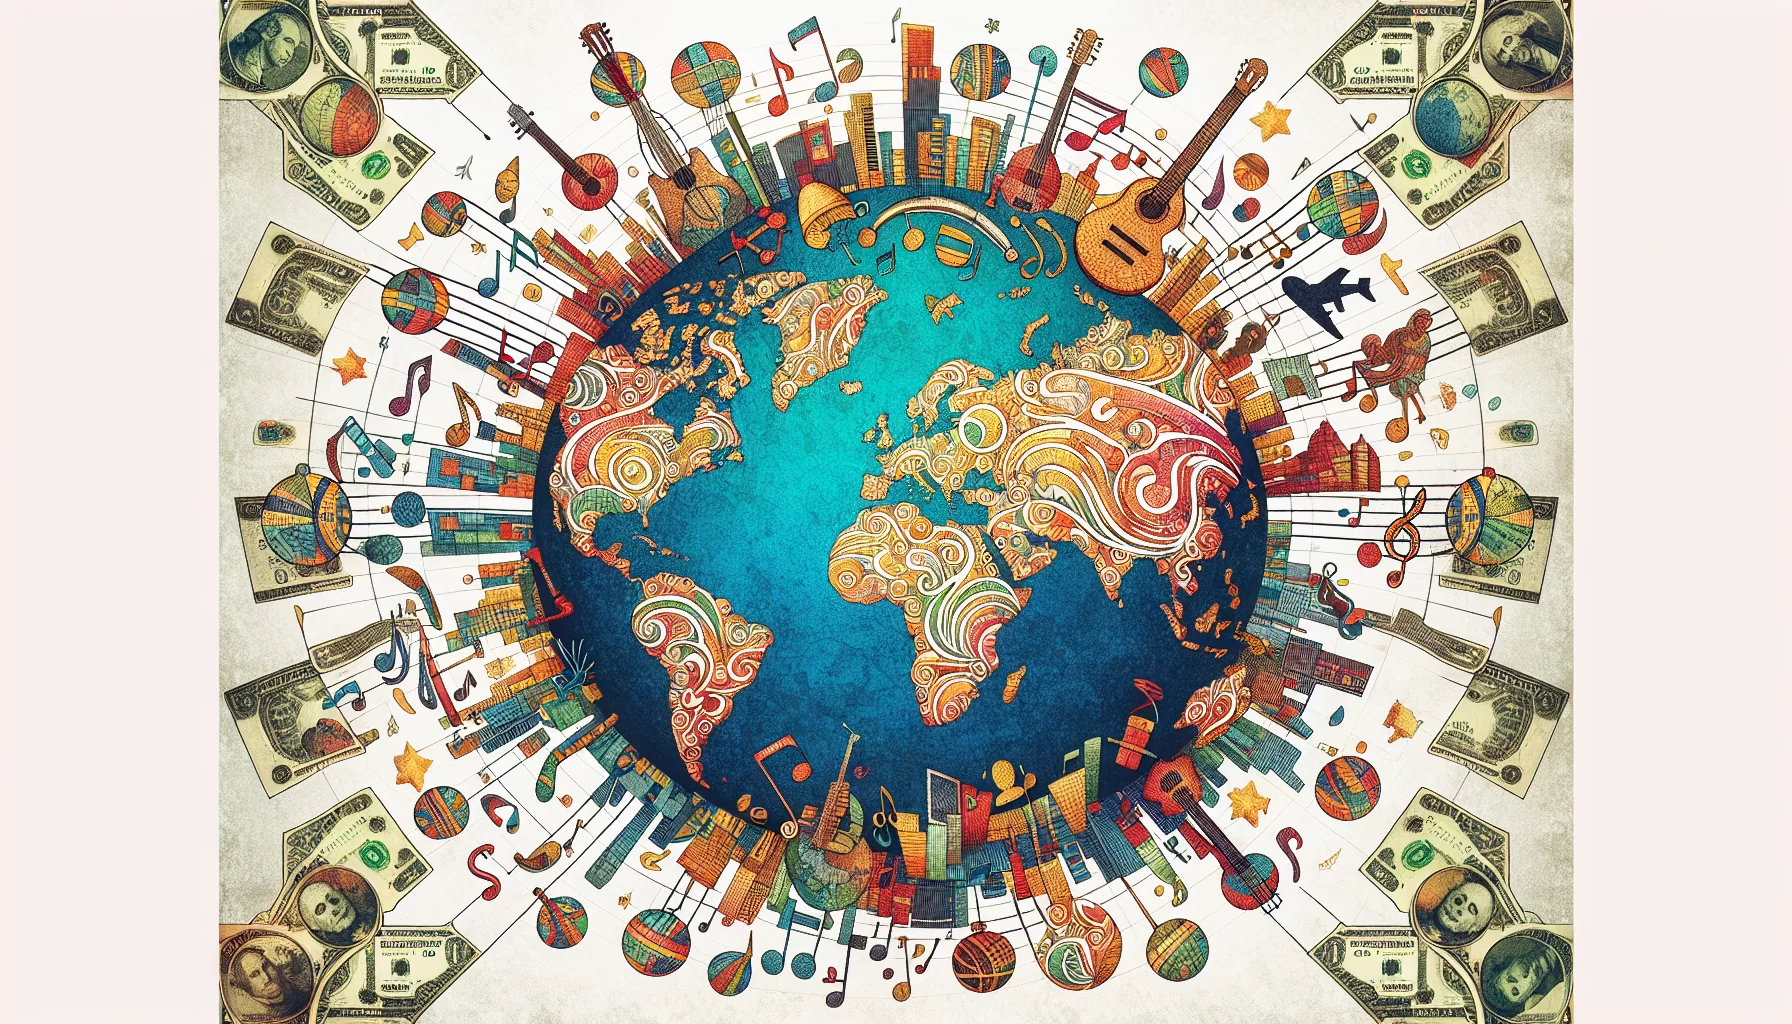 Passion tourism: a global trend reshaping economies and music industry